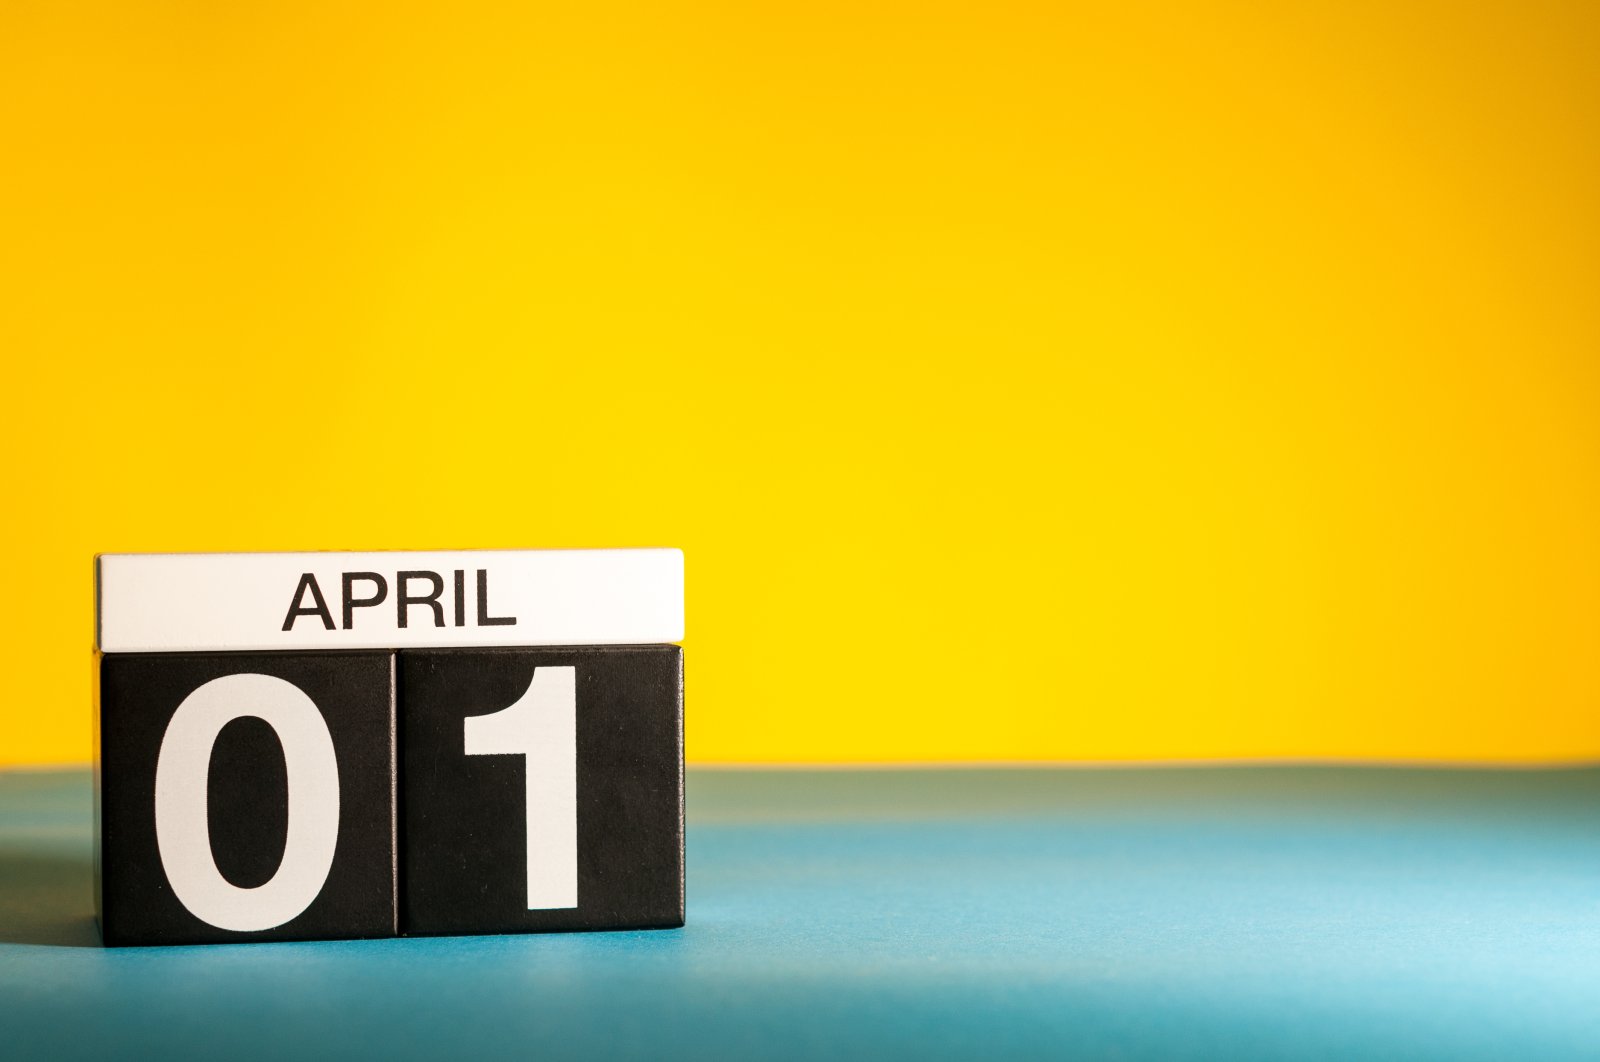 Planning ahead: What’s going on in April